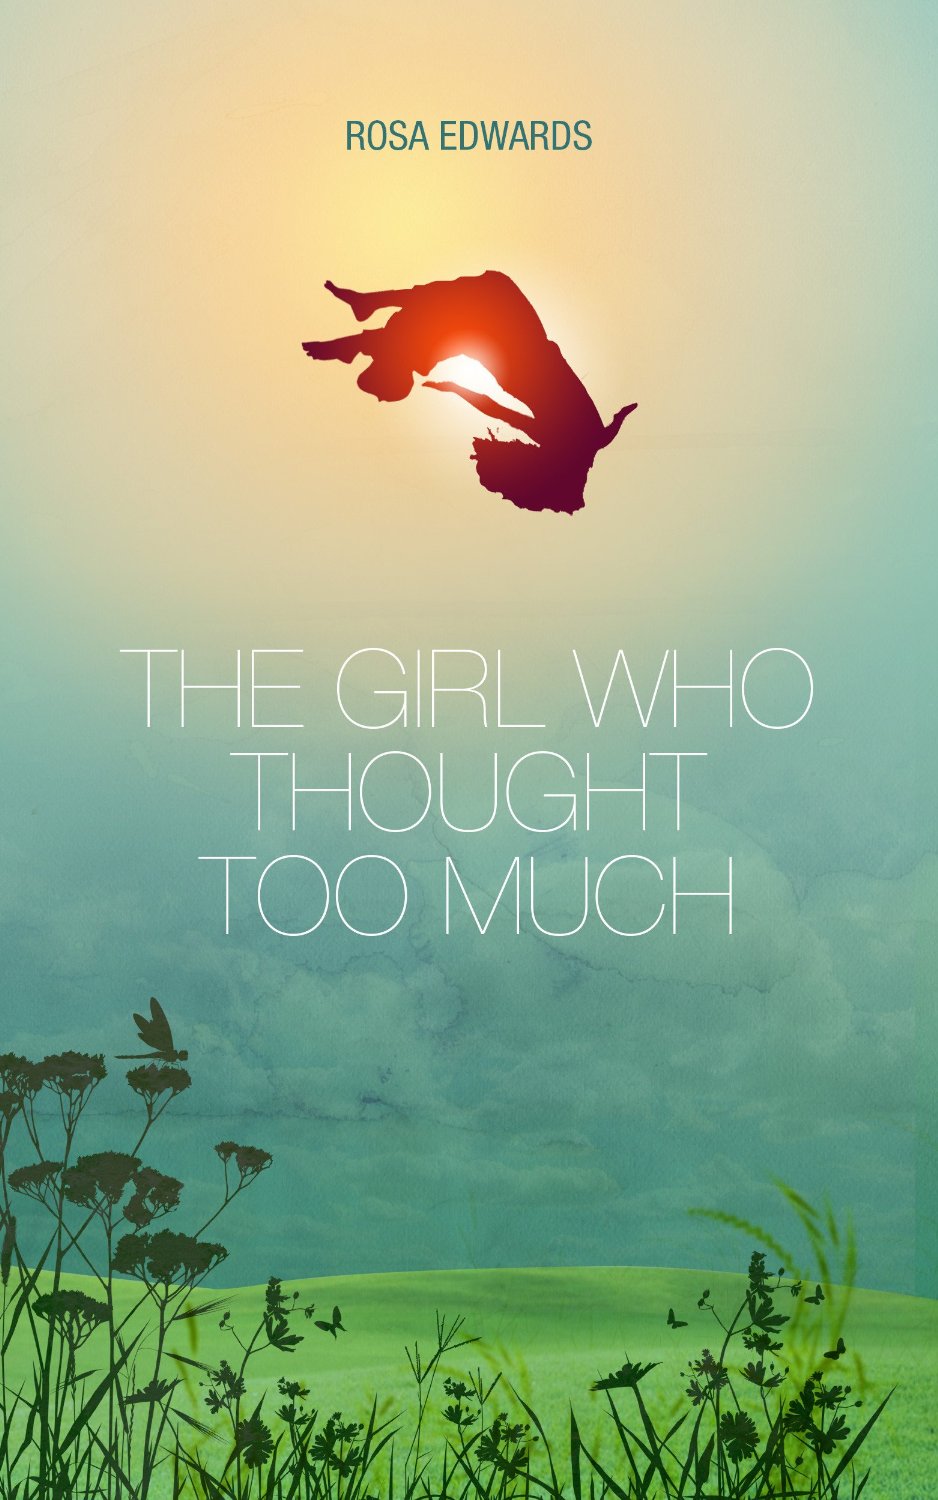 The Girl Who Thought Too Much by Rosa Edwards